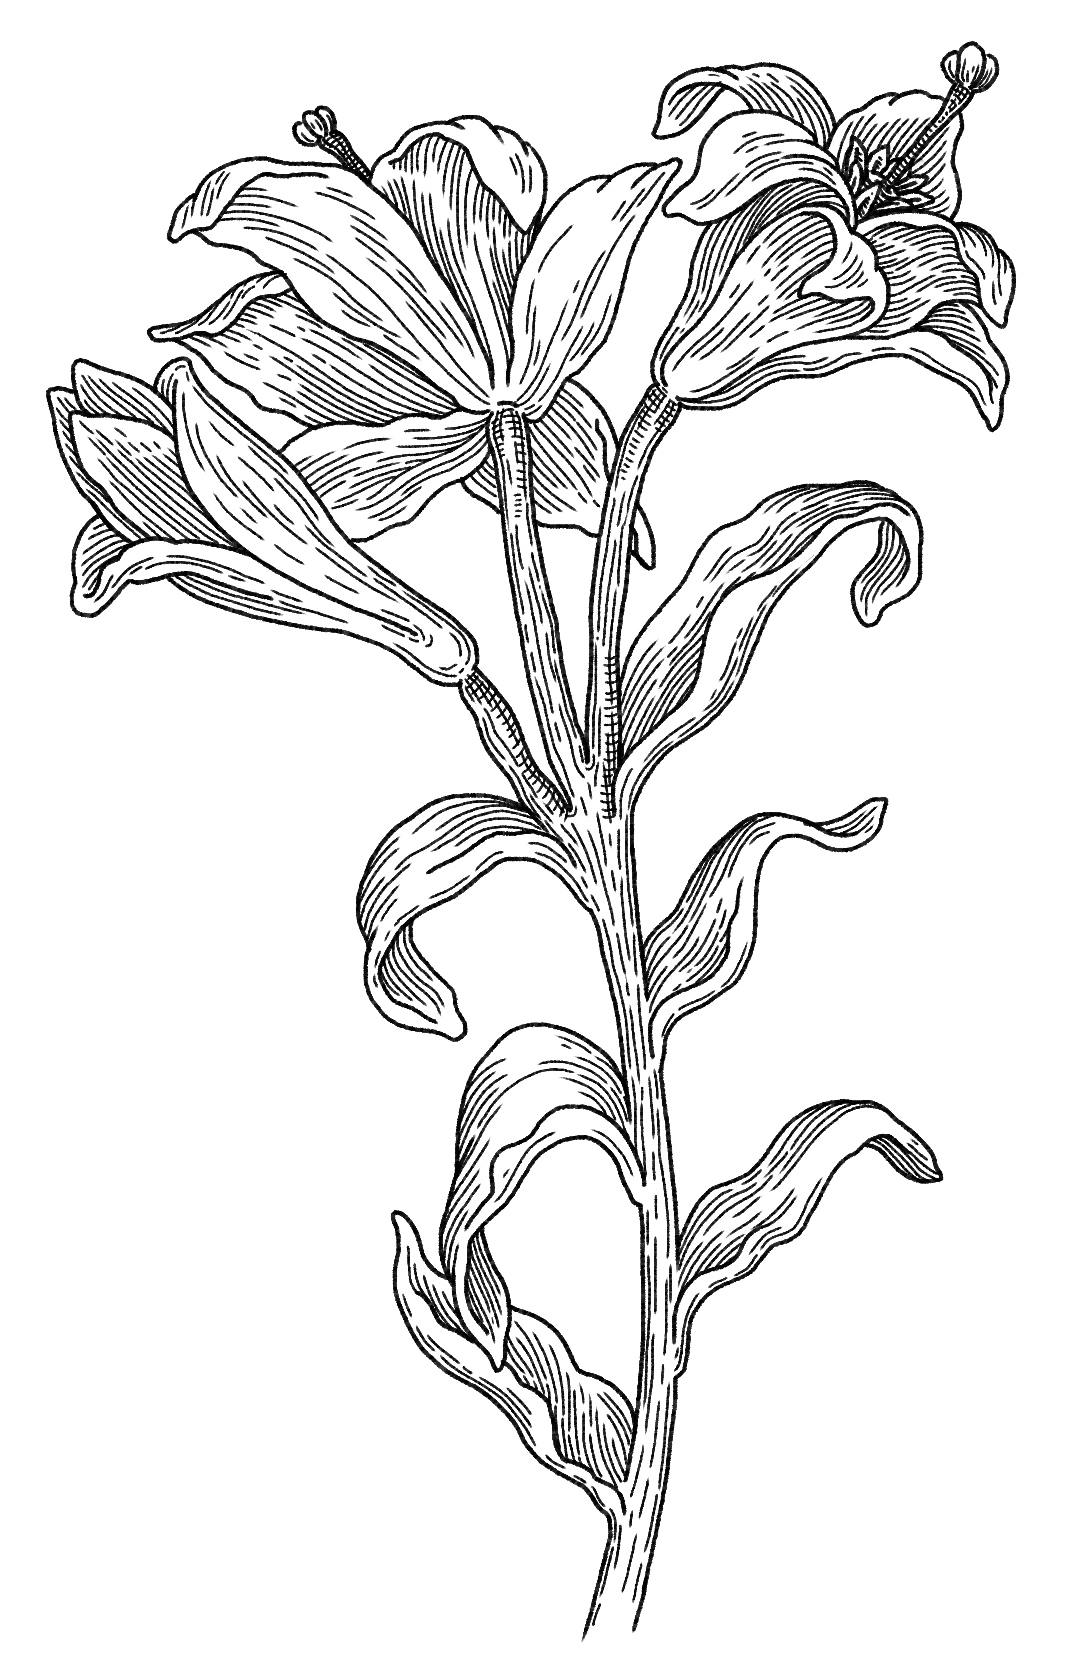 Illustration of a lily in an XVI century engraving style